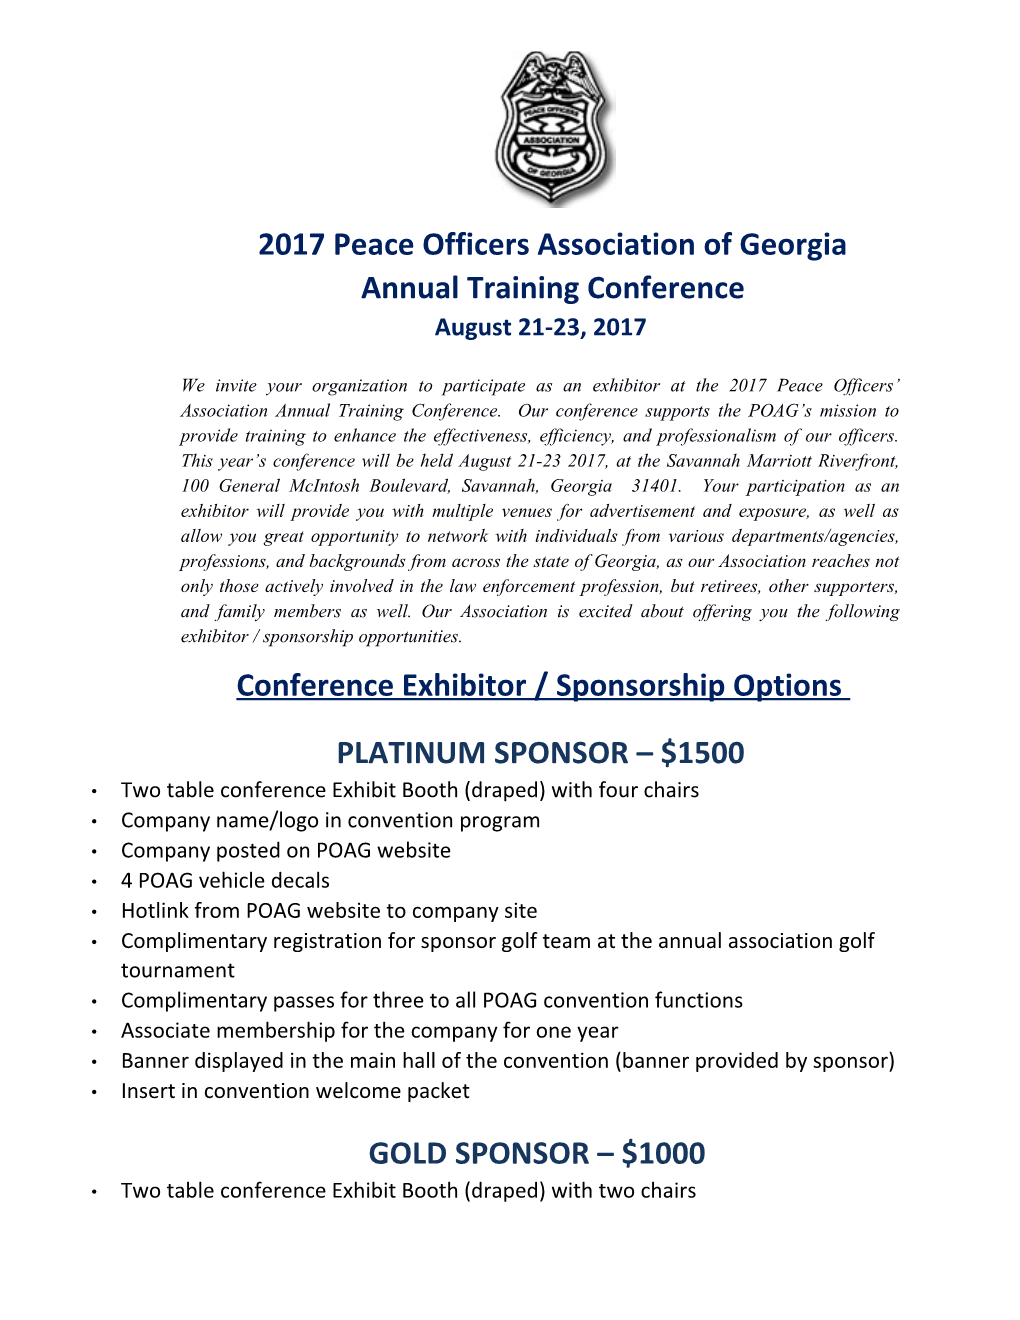 2017 Peace Officers Association of Georgia Annual Training Conference